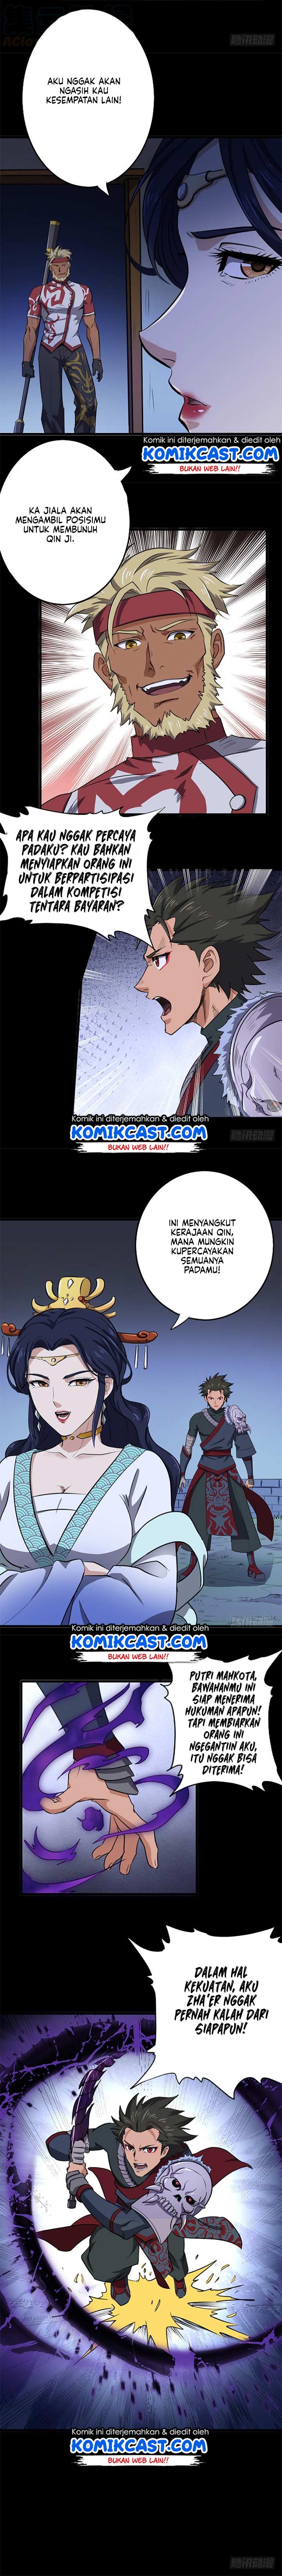 Chaotic Sword God Chapter 155 5